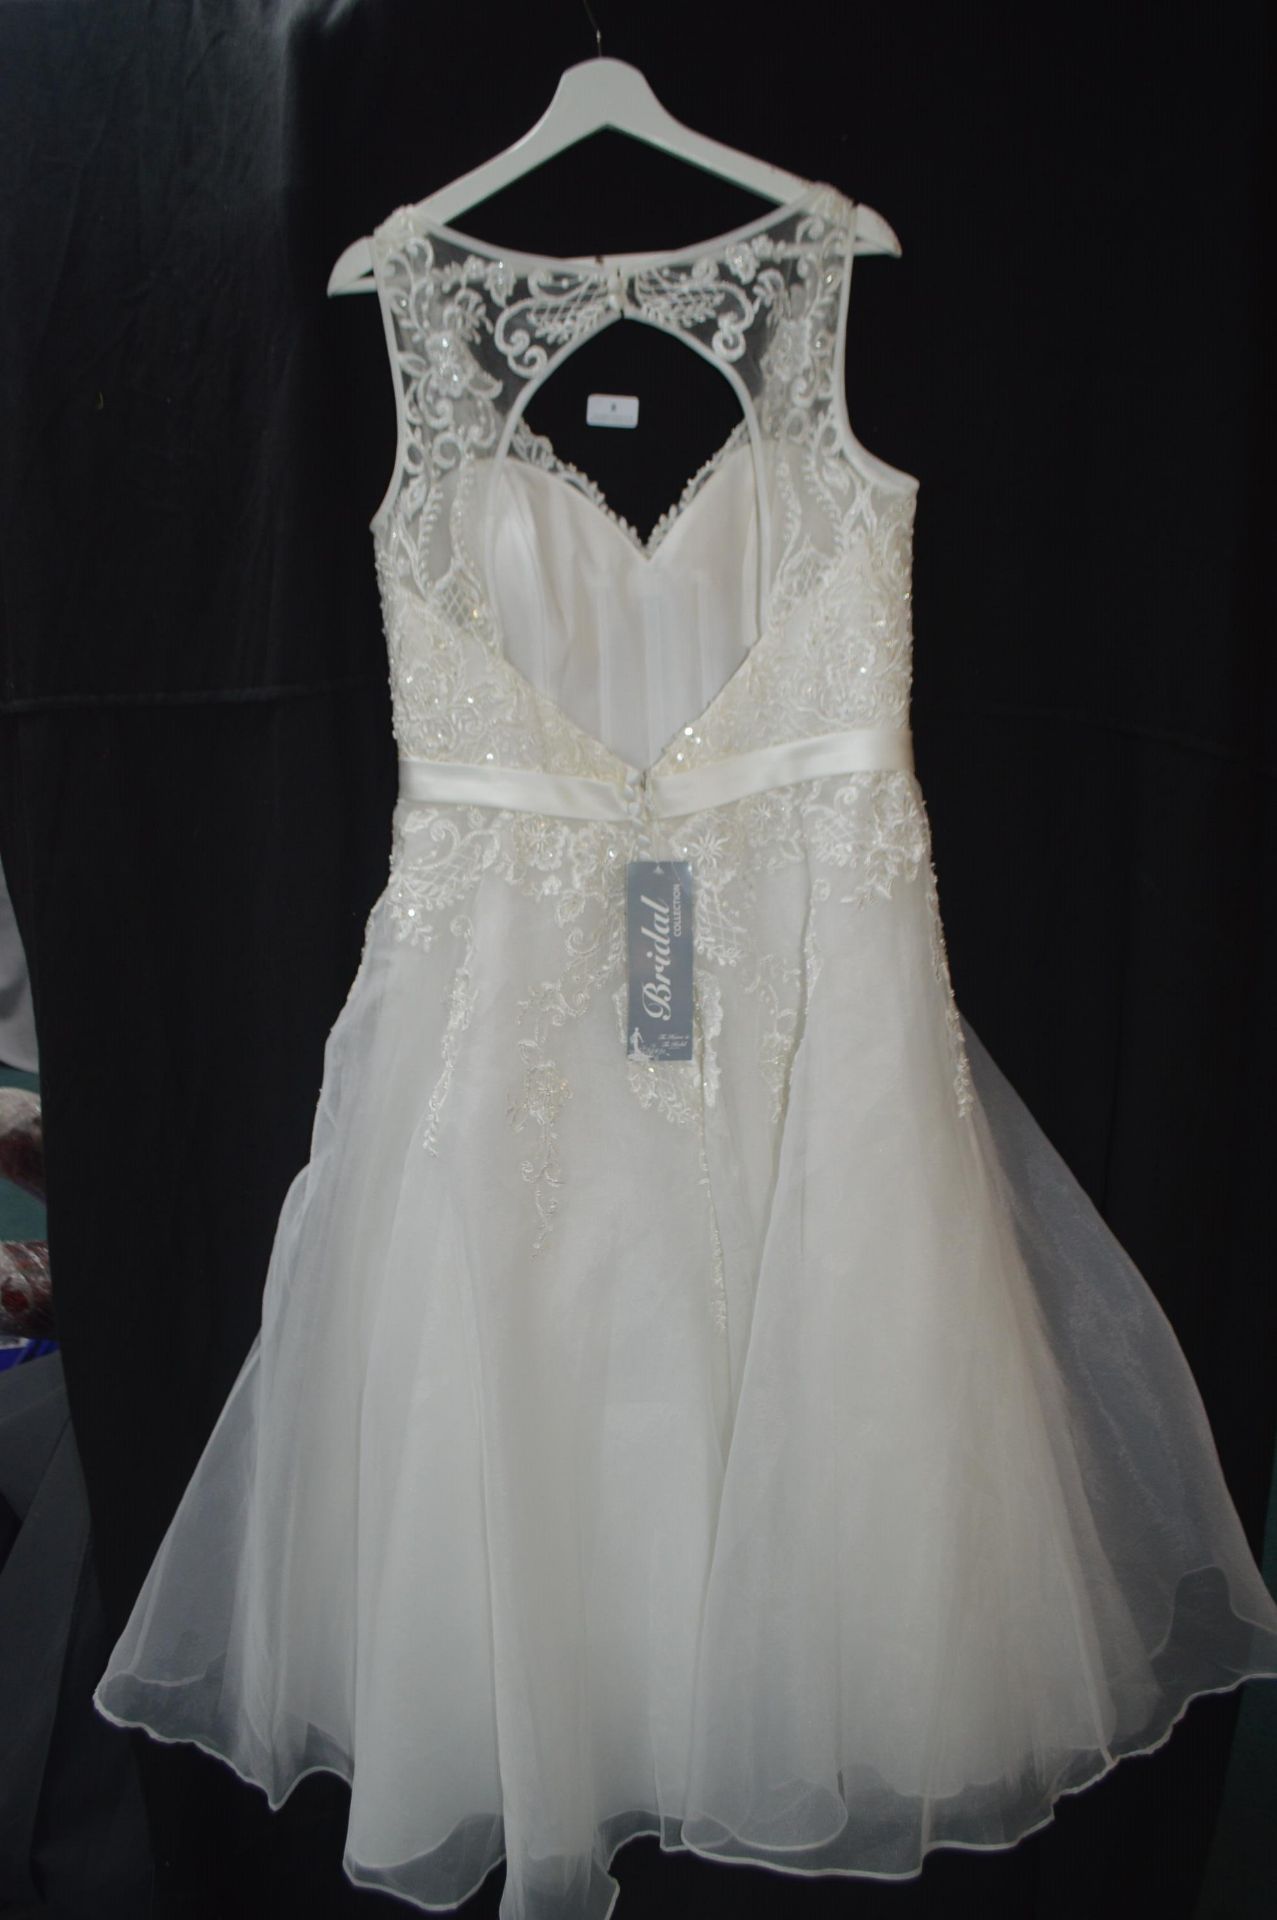 Ivory Wedding Dress by Ella Rosa for Private Label Size: 16/18 - Image 2 of 2